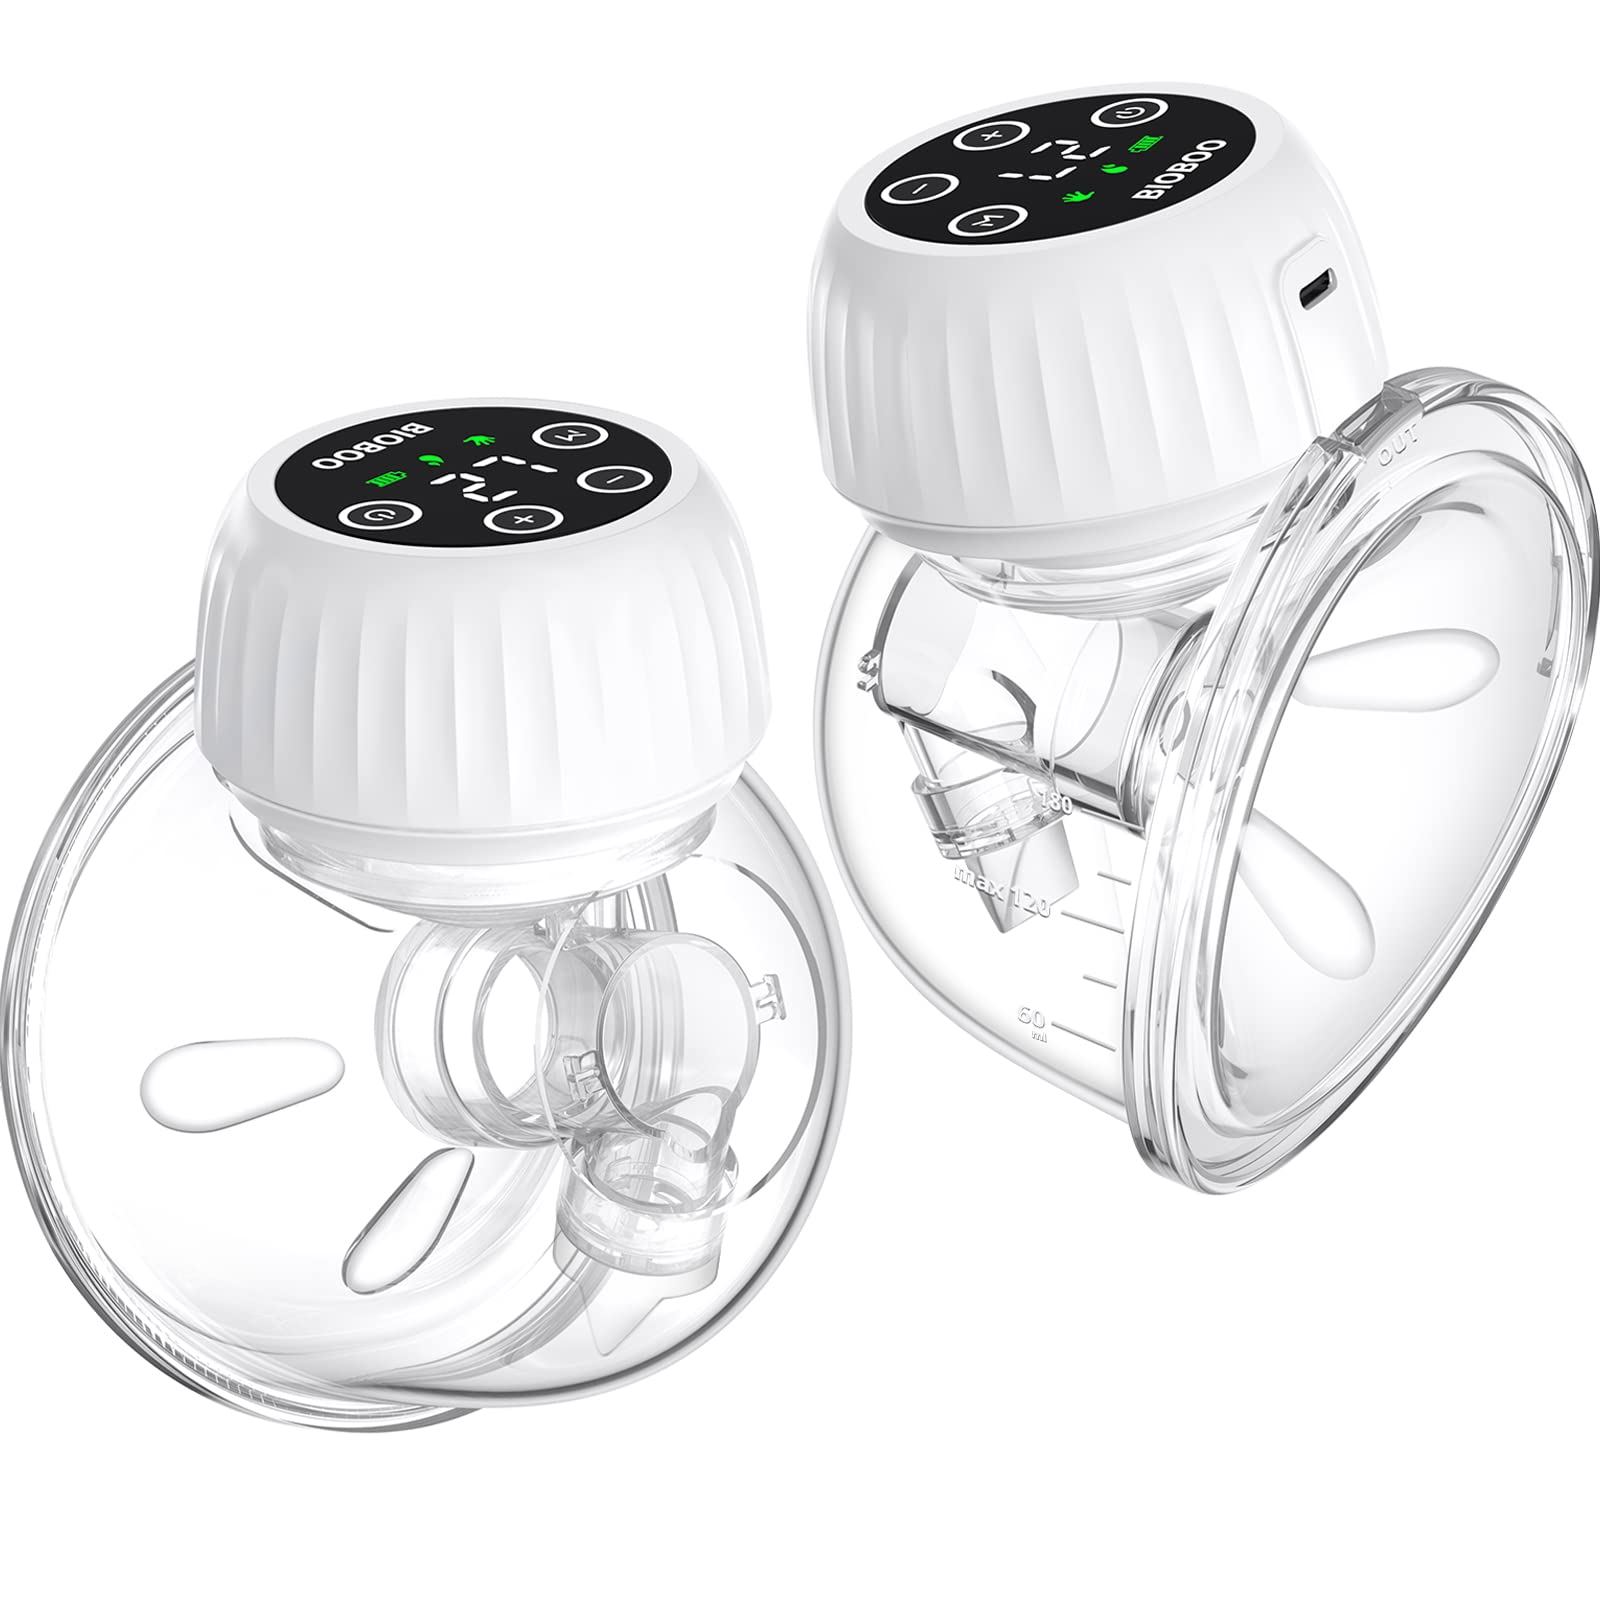 BIOBOO Hands Free Breast Pump, Wearable Breast Pump with Silicone Massage Petal Function, Portable Electric Breast Pump 2 Packs - White